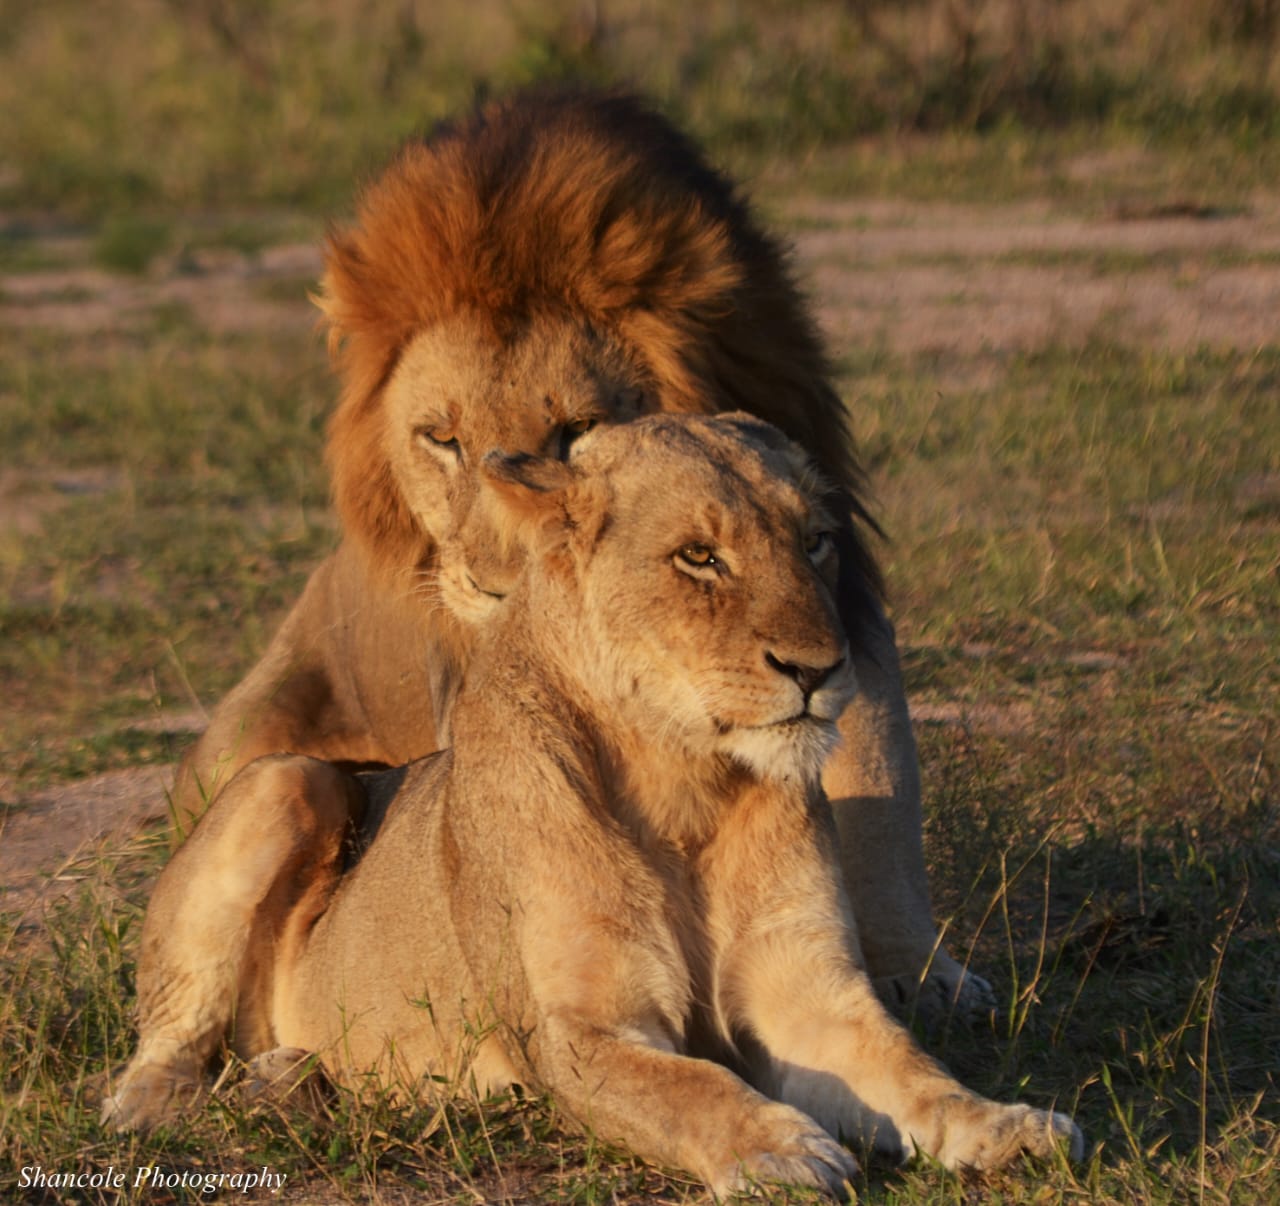 Lions Mating in the Wild